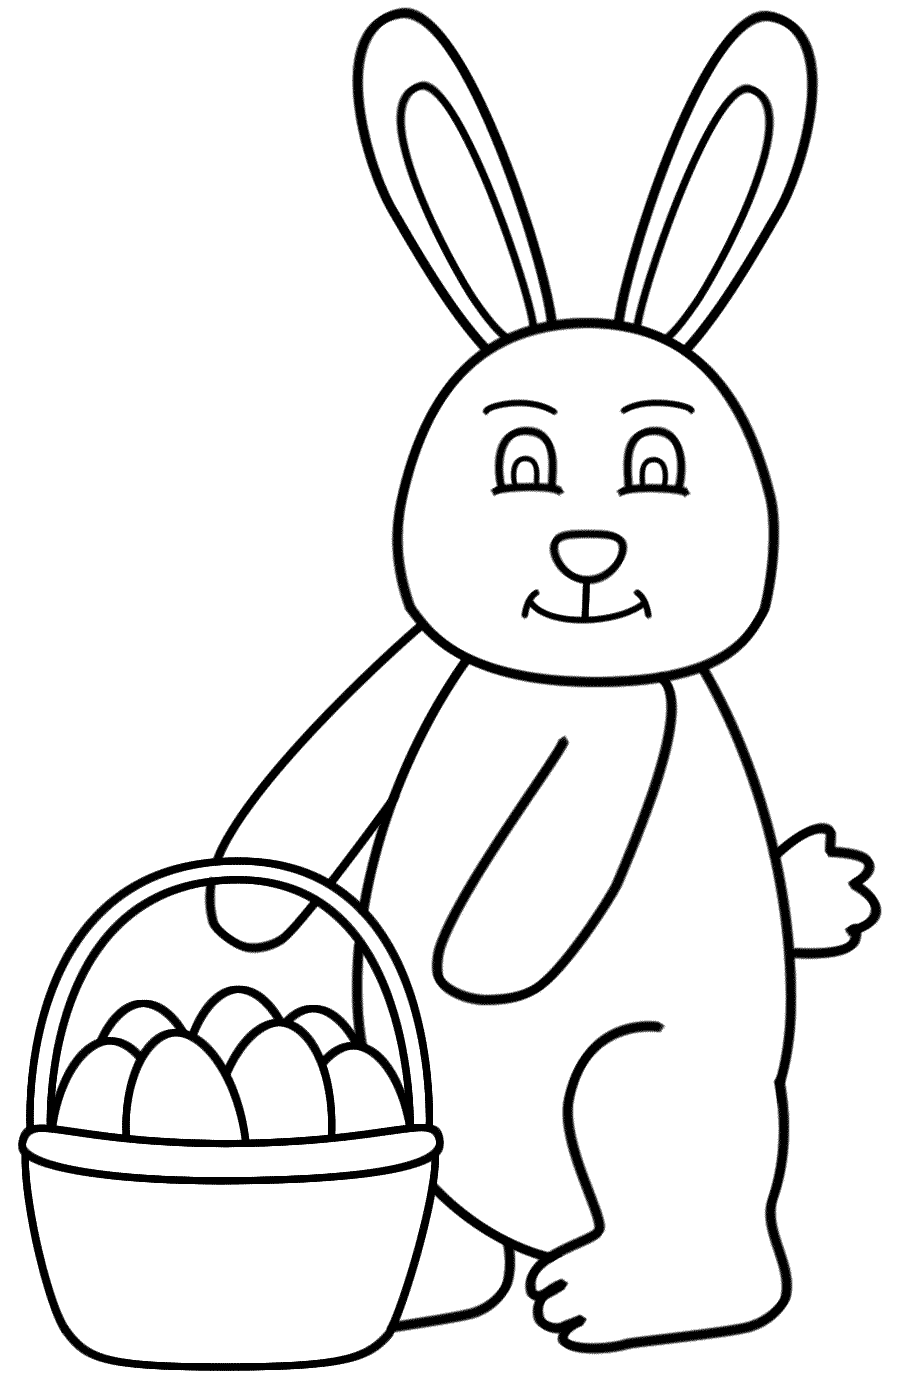 Easter Bunny holding Basket of Eggs - Coloring Page (Easter)